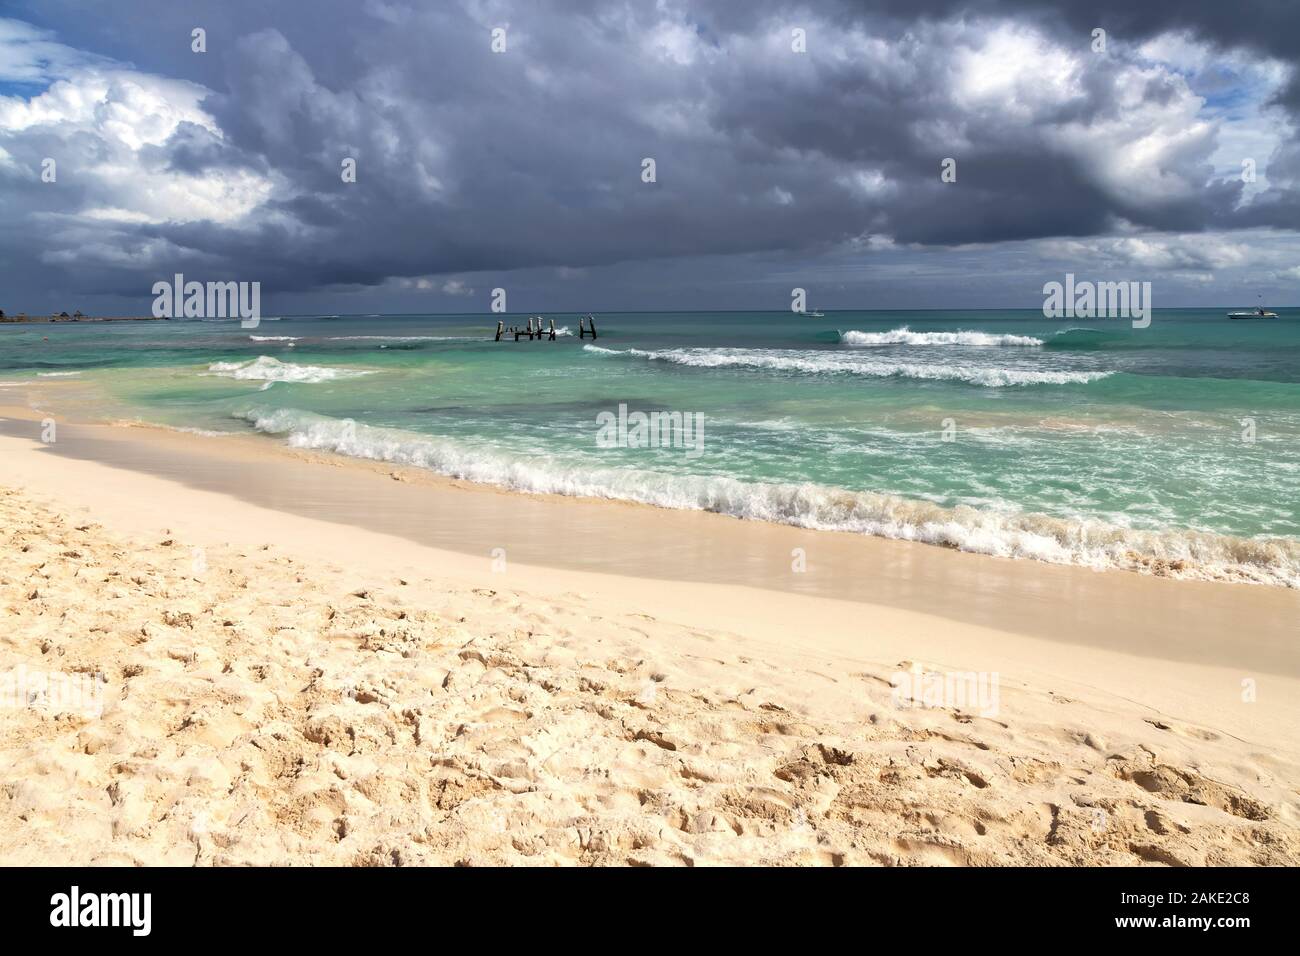 Dark clouds form over the sea with waves crashing the beach as storm approaches. Stock Photo